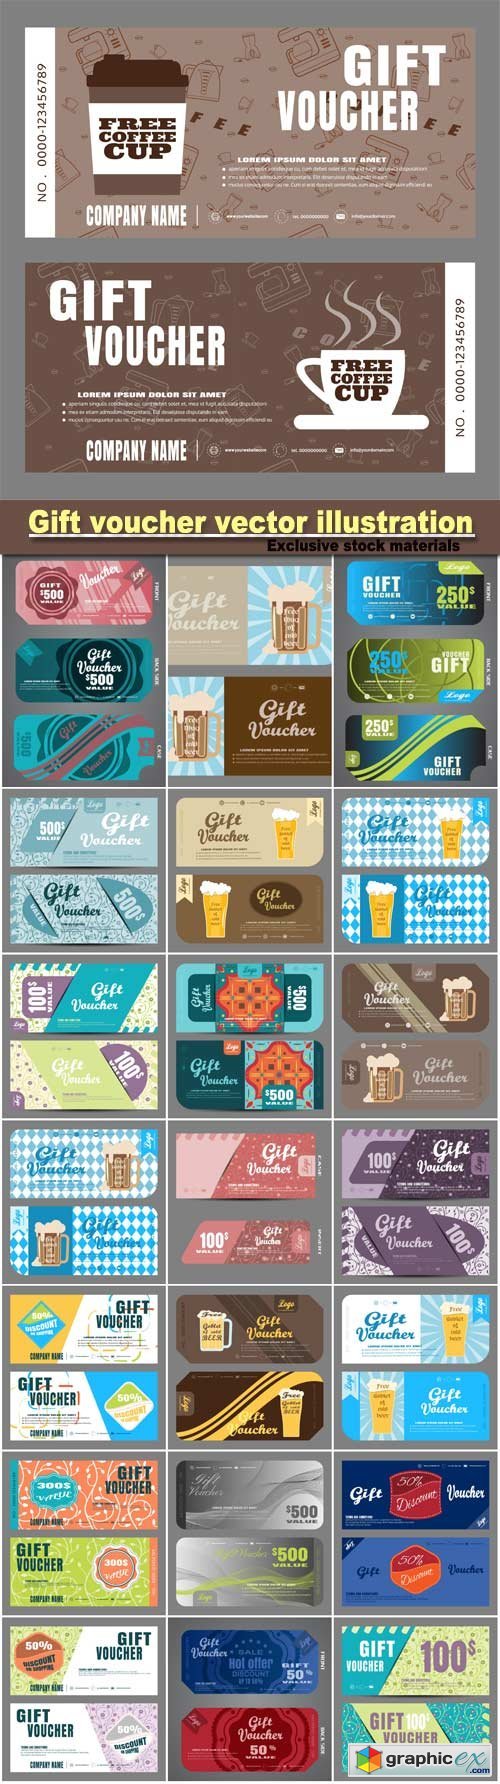 Gift voucher vector illustration to increase the sales